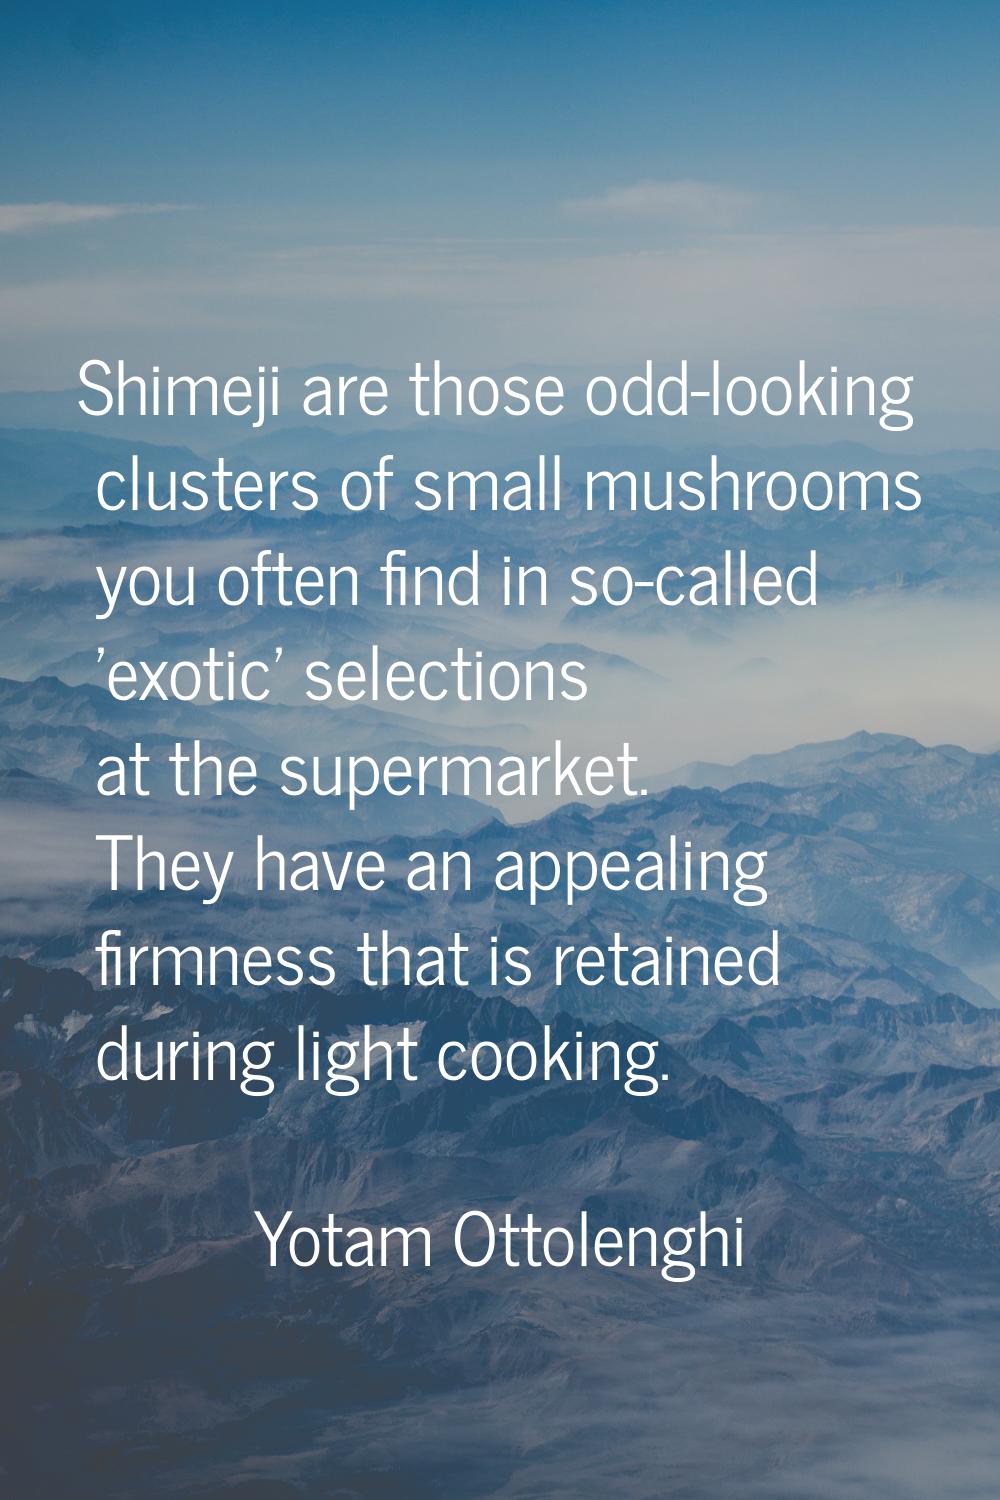 Shimeji are those odd-looking clusters of small mushrooms you often find in so-called 'exotic' sele